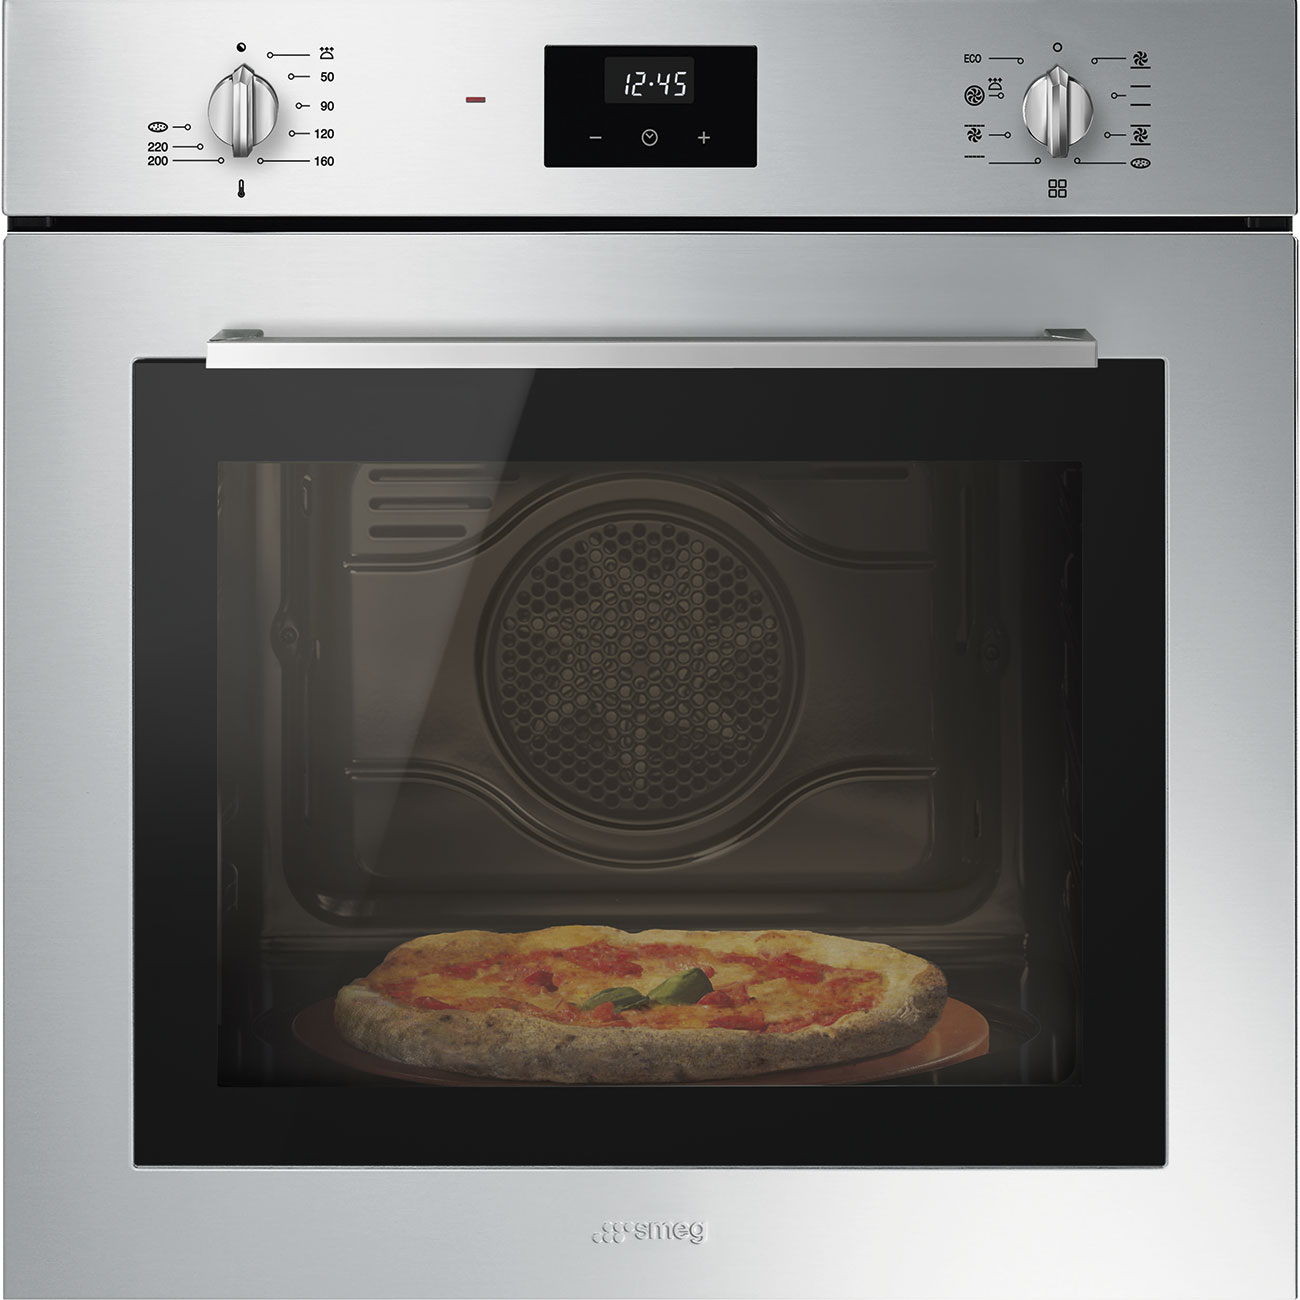 Oven Thermo-ventilated 60cm Smeg_2